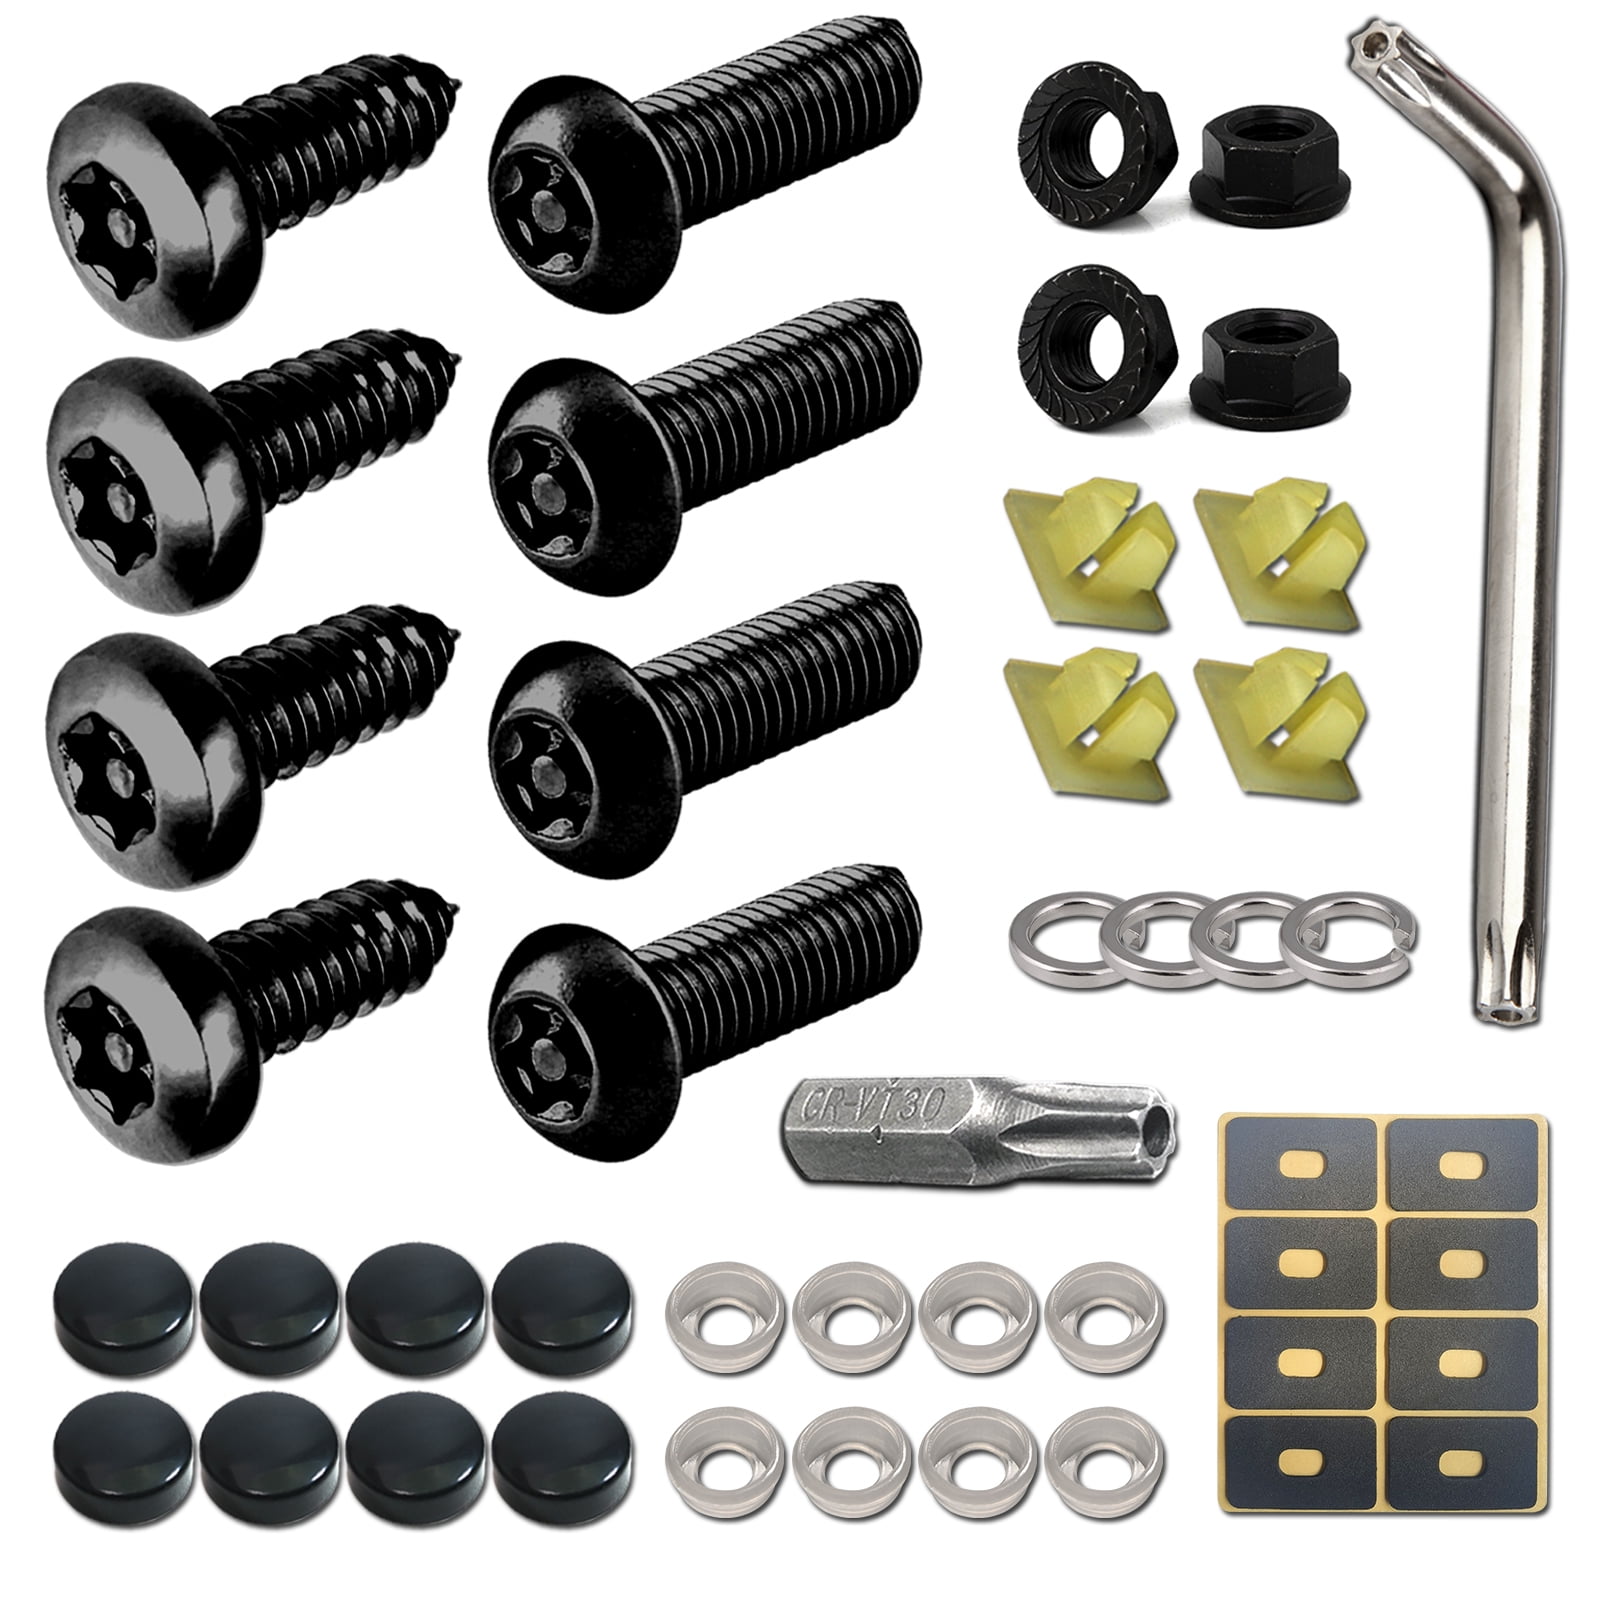  4 Set Car Number Plate Caps Screws Bolts Nuts Fitting Fix,  MoreChioce Universal Caps and Screws Car License Plate Fixing Fitting Kit  with Nuts Bolt Fixed Base Solid Sealing Cap 